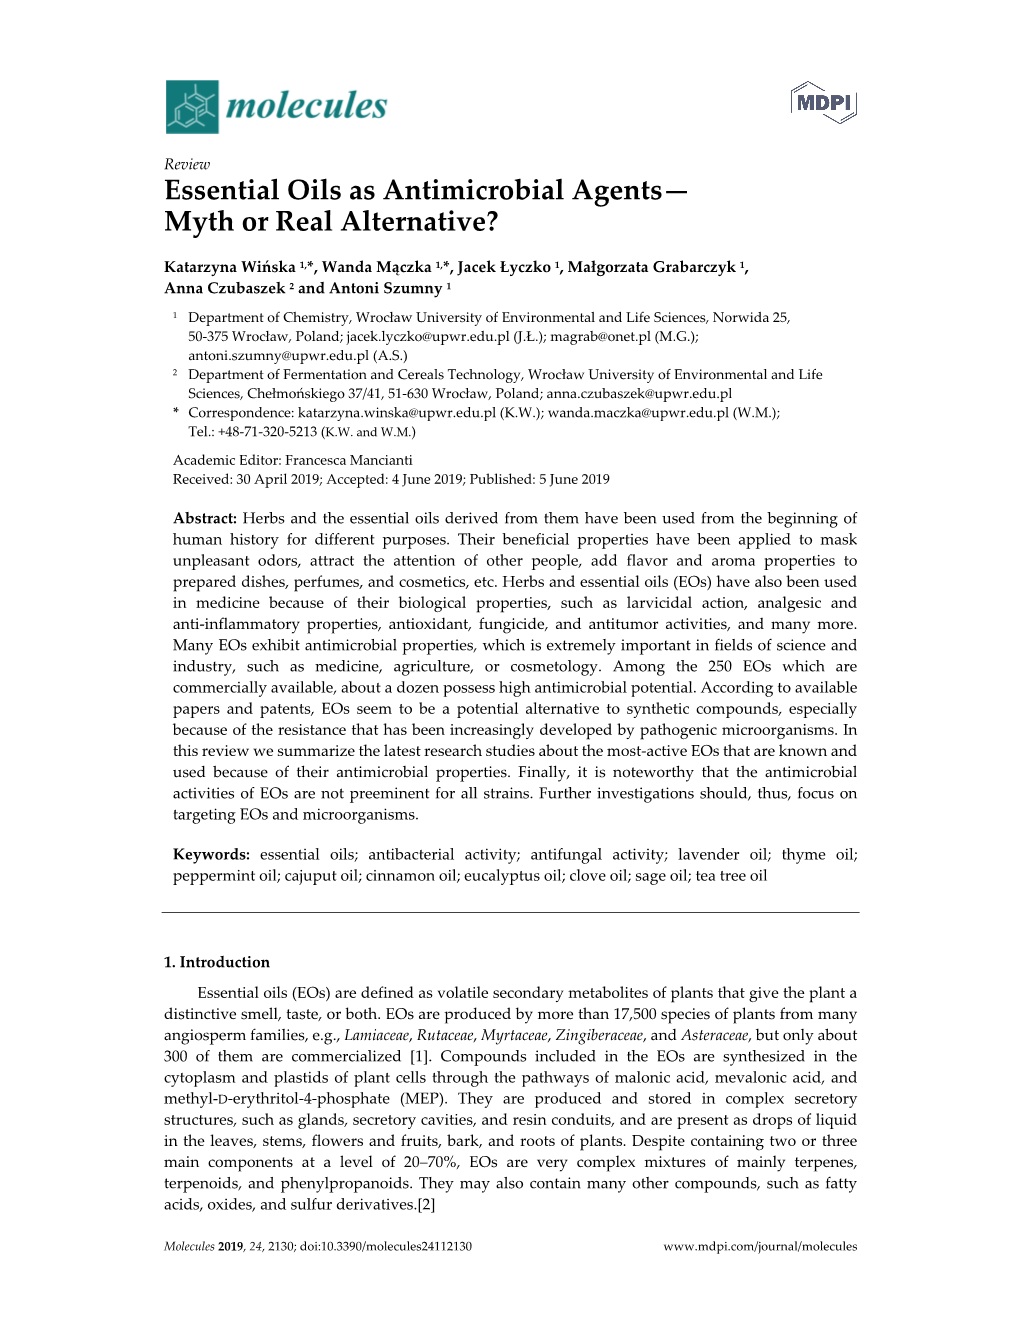 Essential Oils As Antimicrobial Agents— Myth Or Real Alternative?